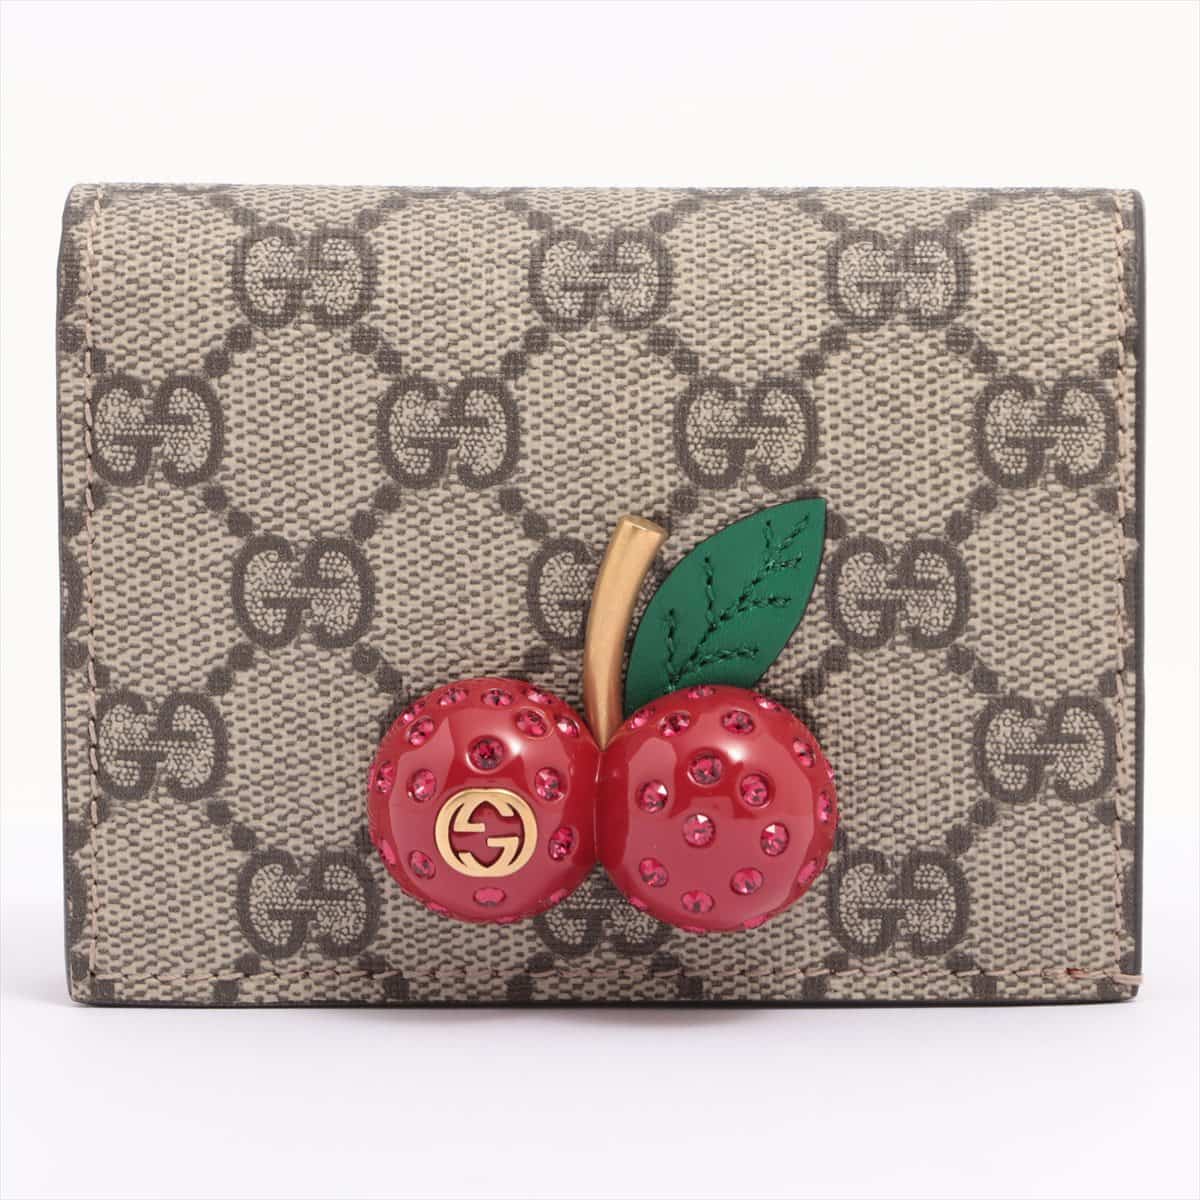 Gucci GG Supreme cherry PVC & leather Compact Wallet Beige 476050